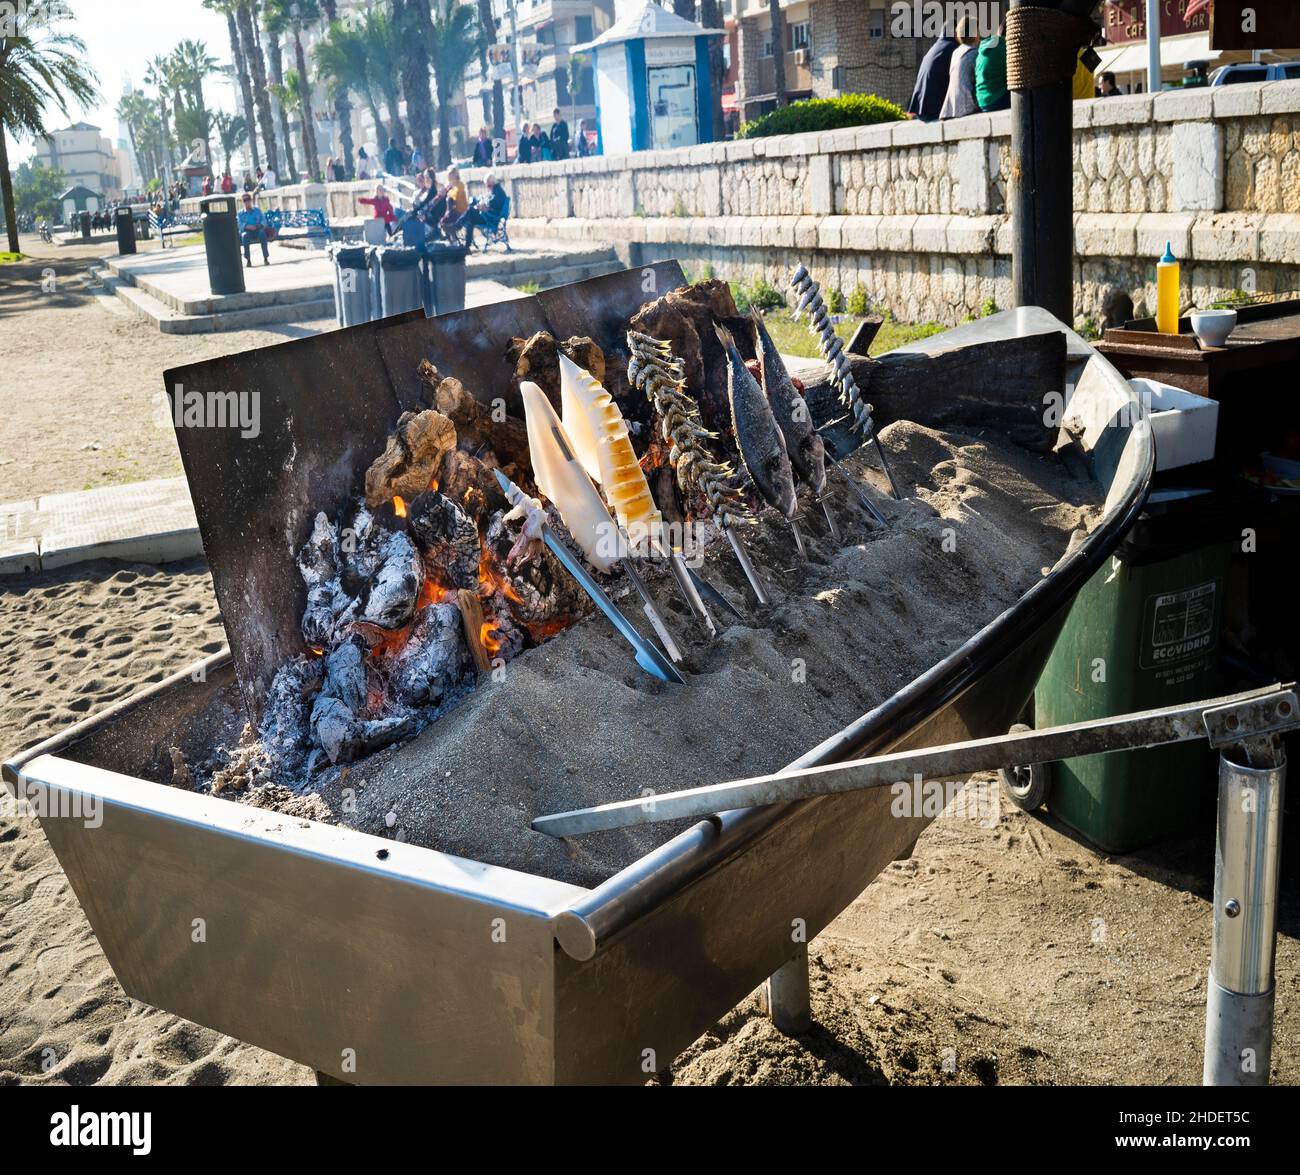 Espeto de Sardines (skewered sardines). This is a tradition in Malaga , sardines being slowly grilled over an open wood fire on the beach Stock Photo